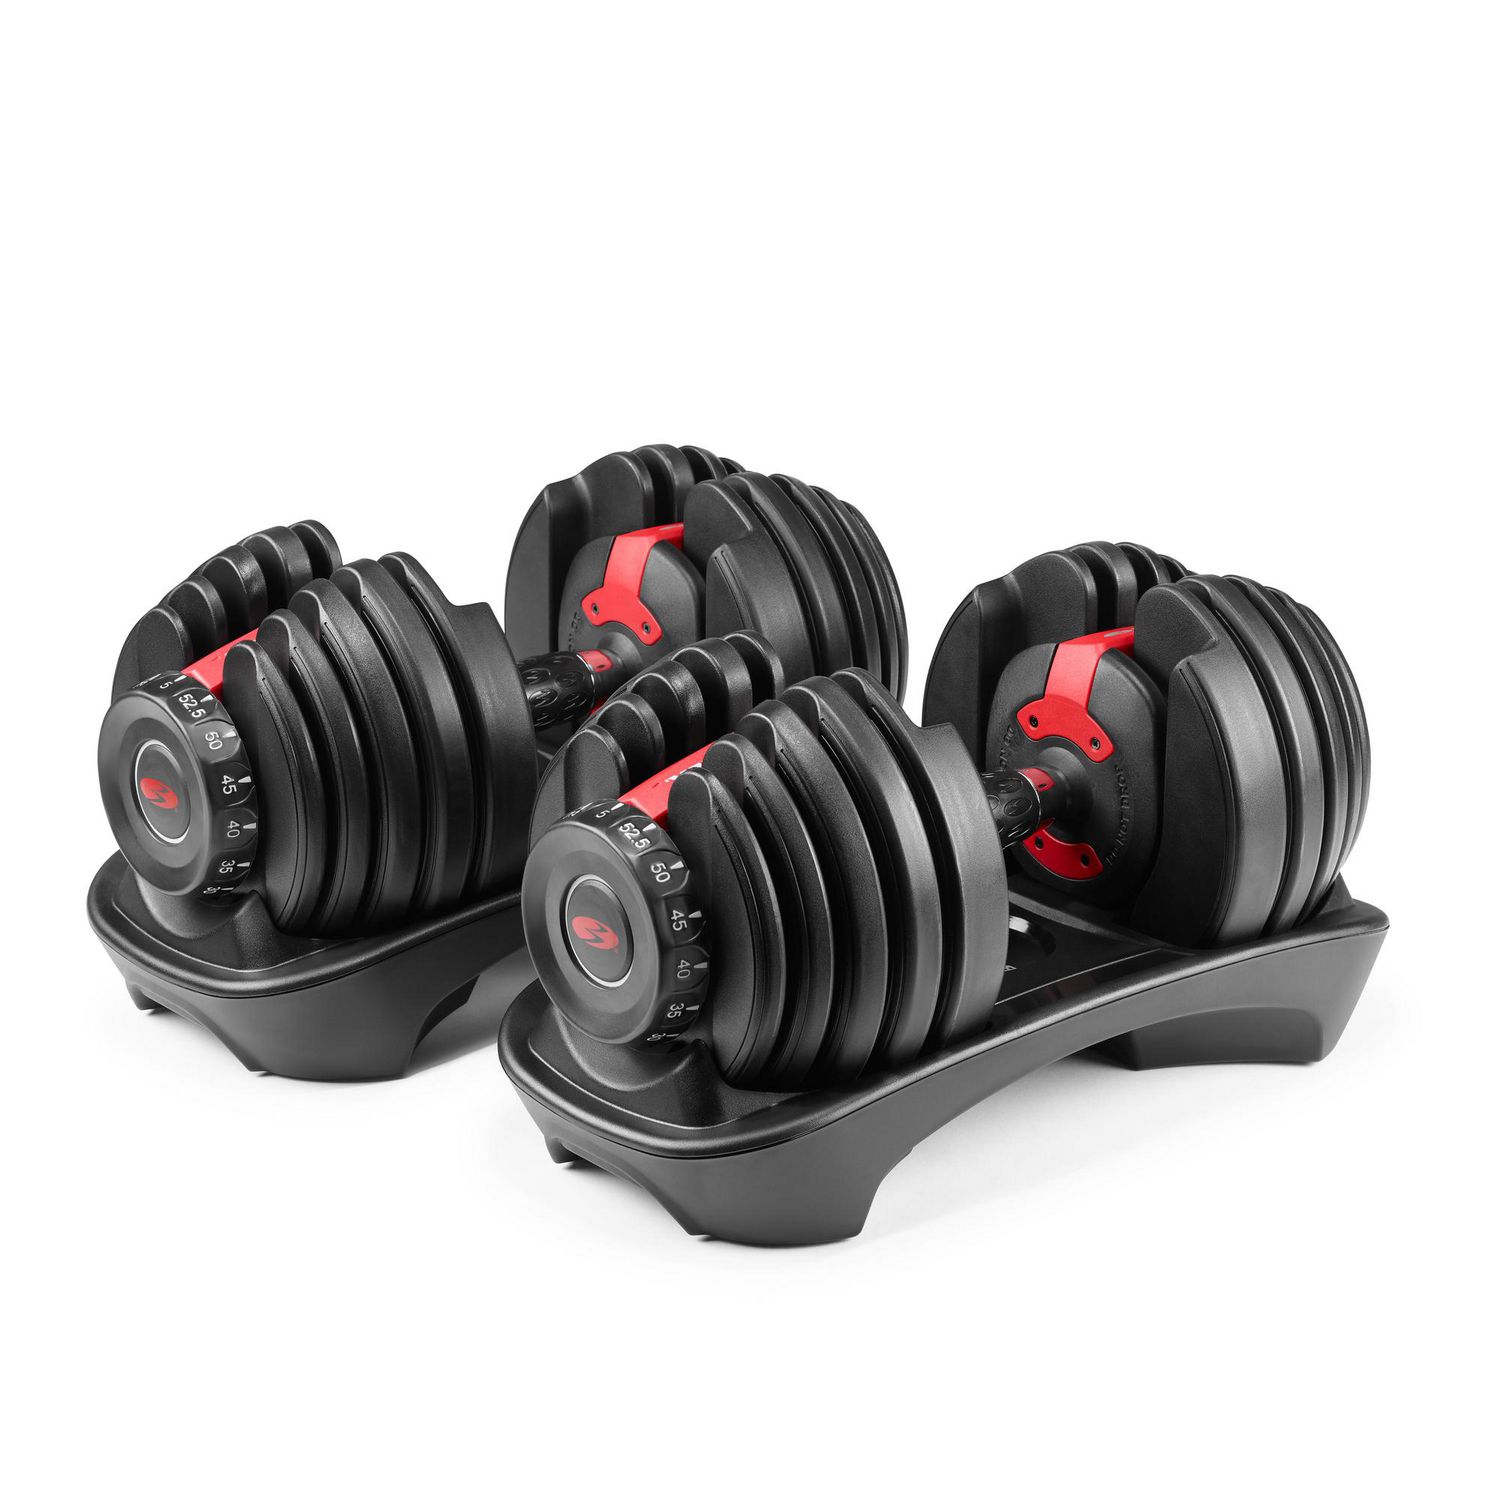 0.5//1 // 1.5 kg 3 Pairs of Neoprene Free Weights with Stand PRISP Dumbbells Set with Rack